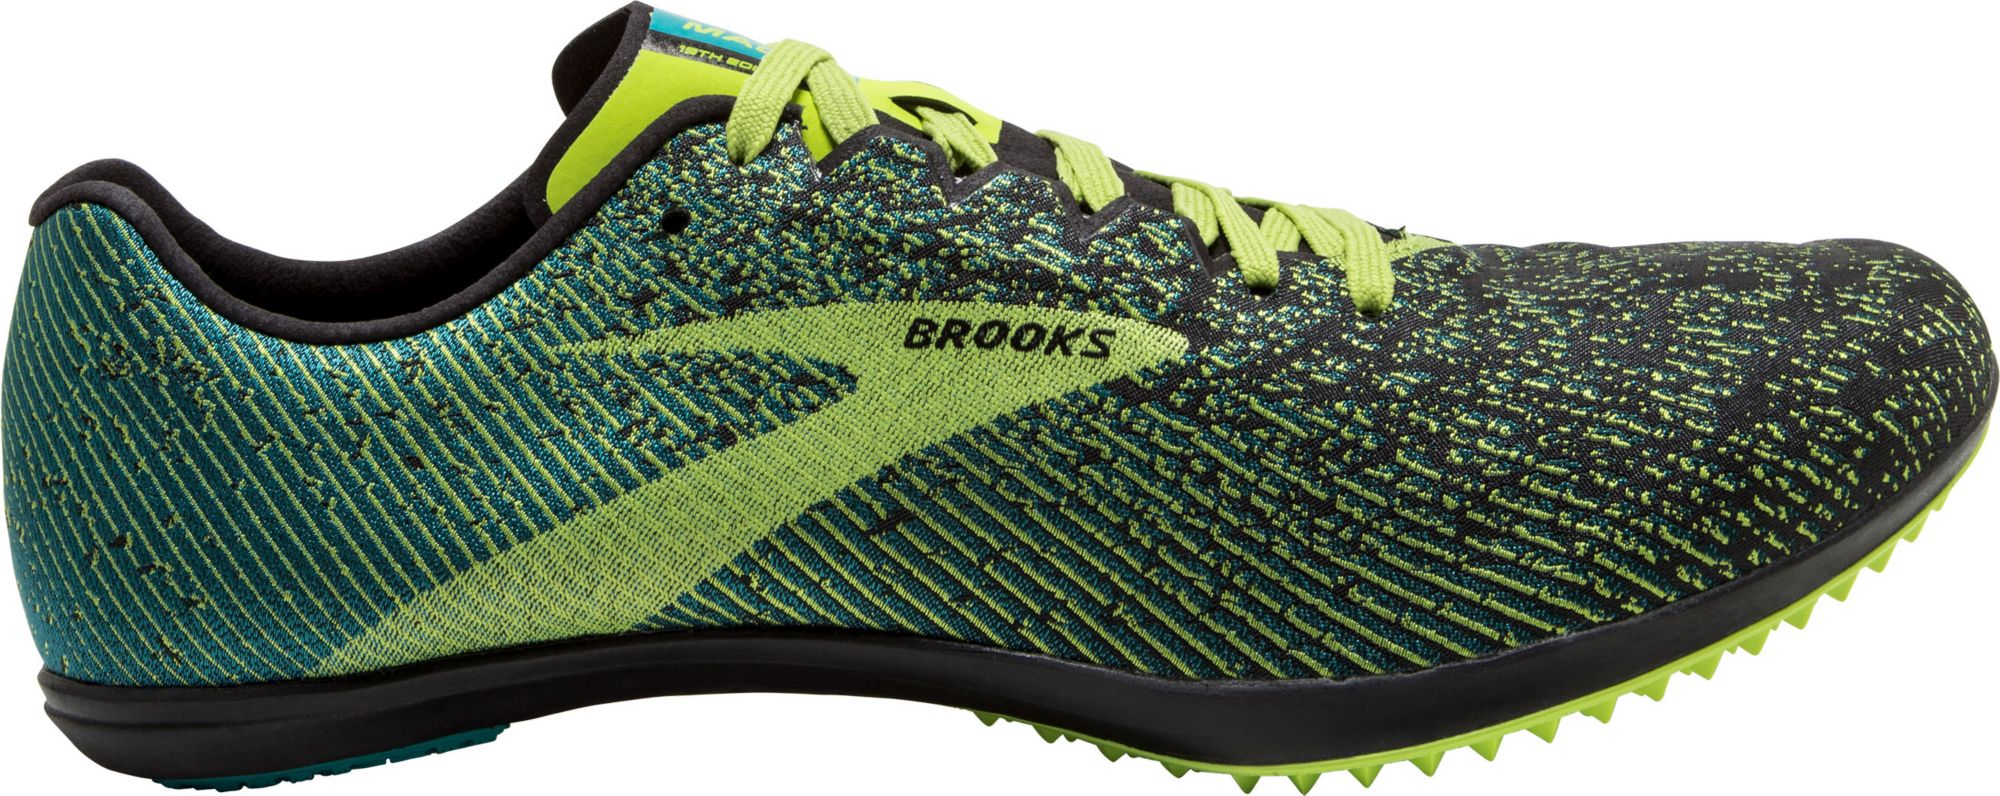 brooks cross country shoes